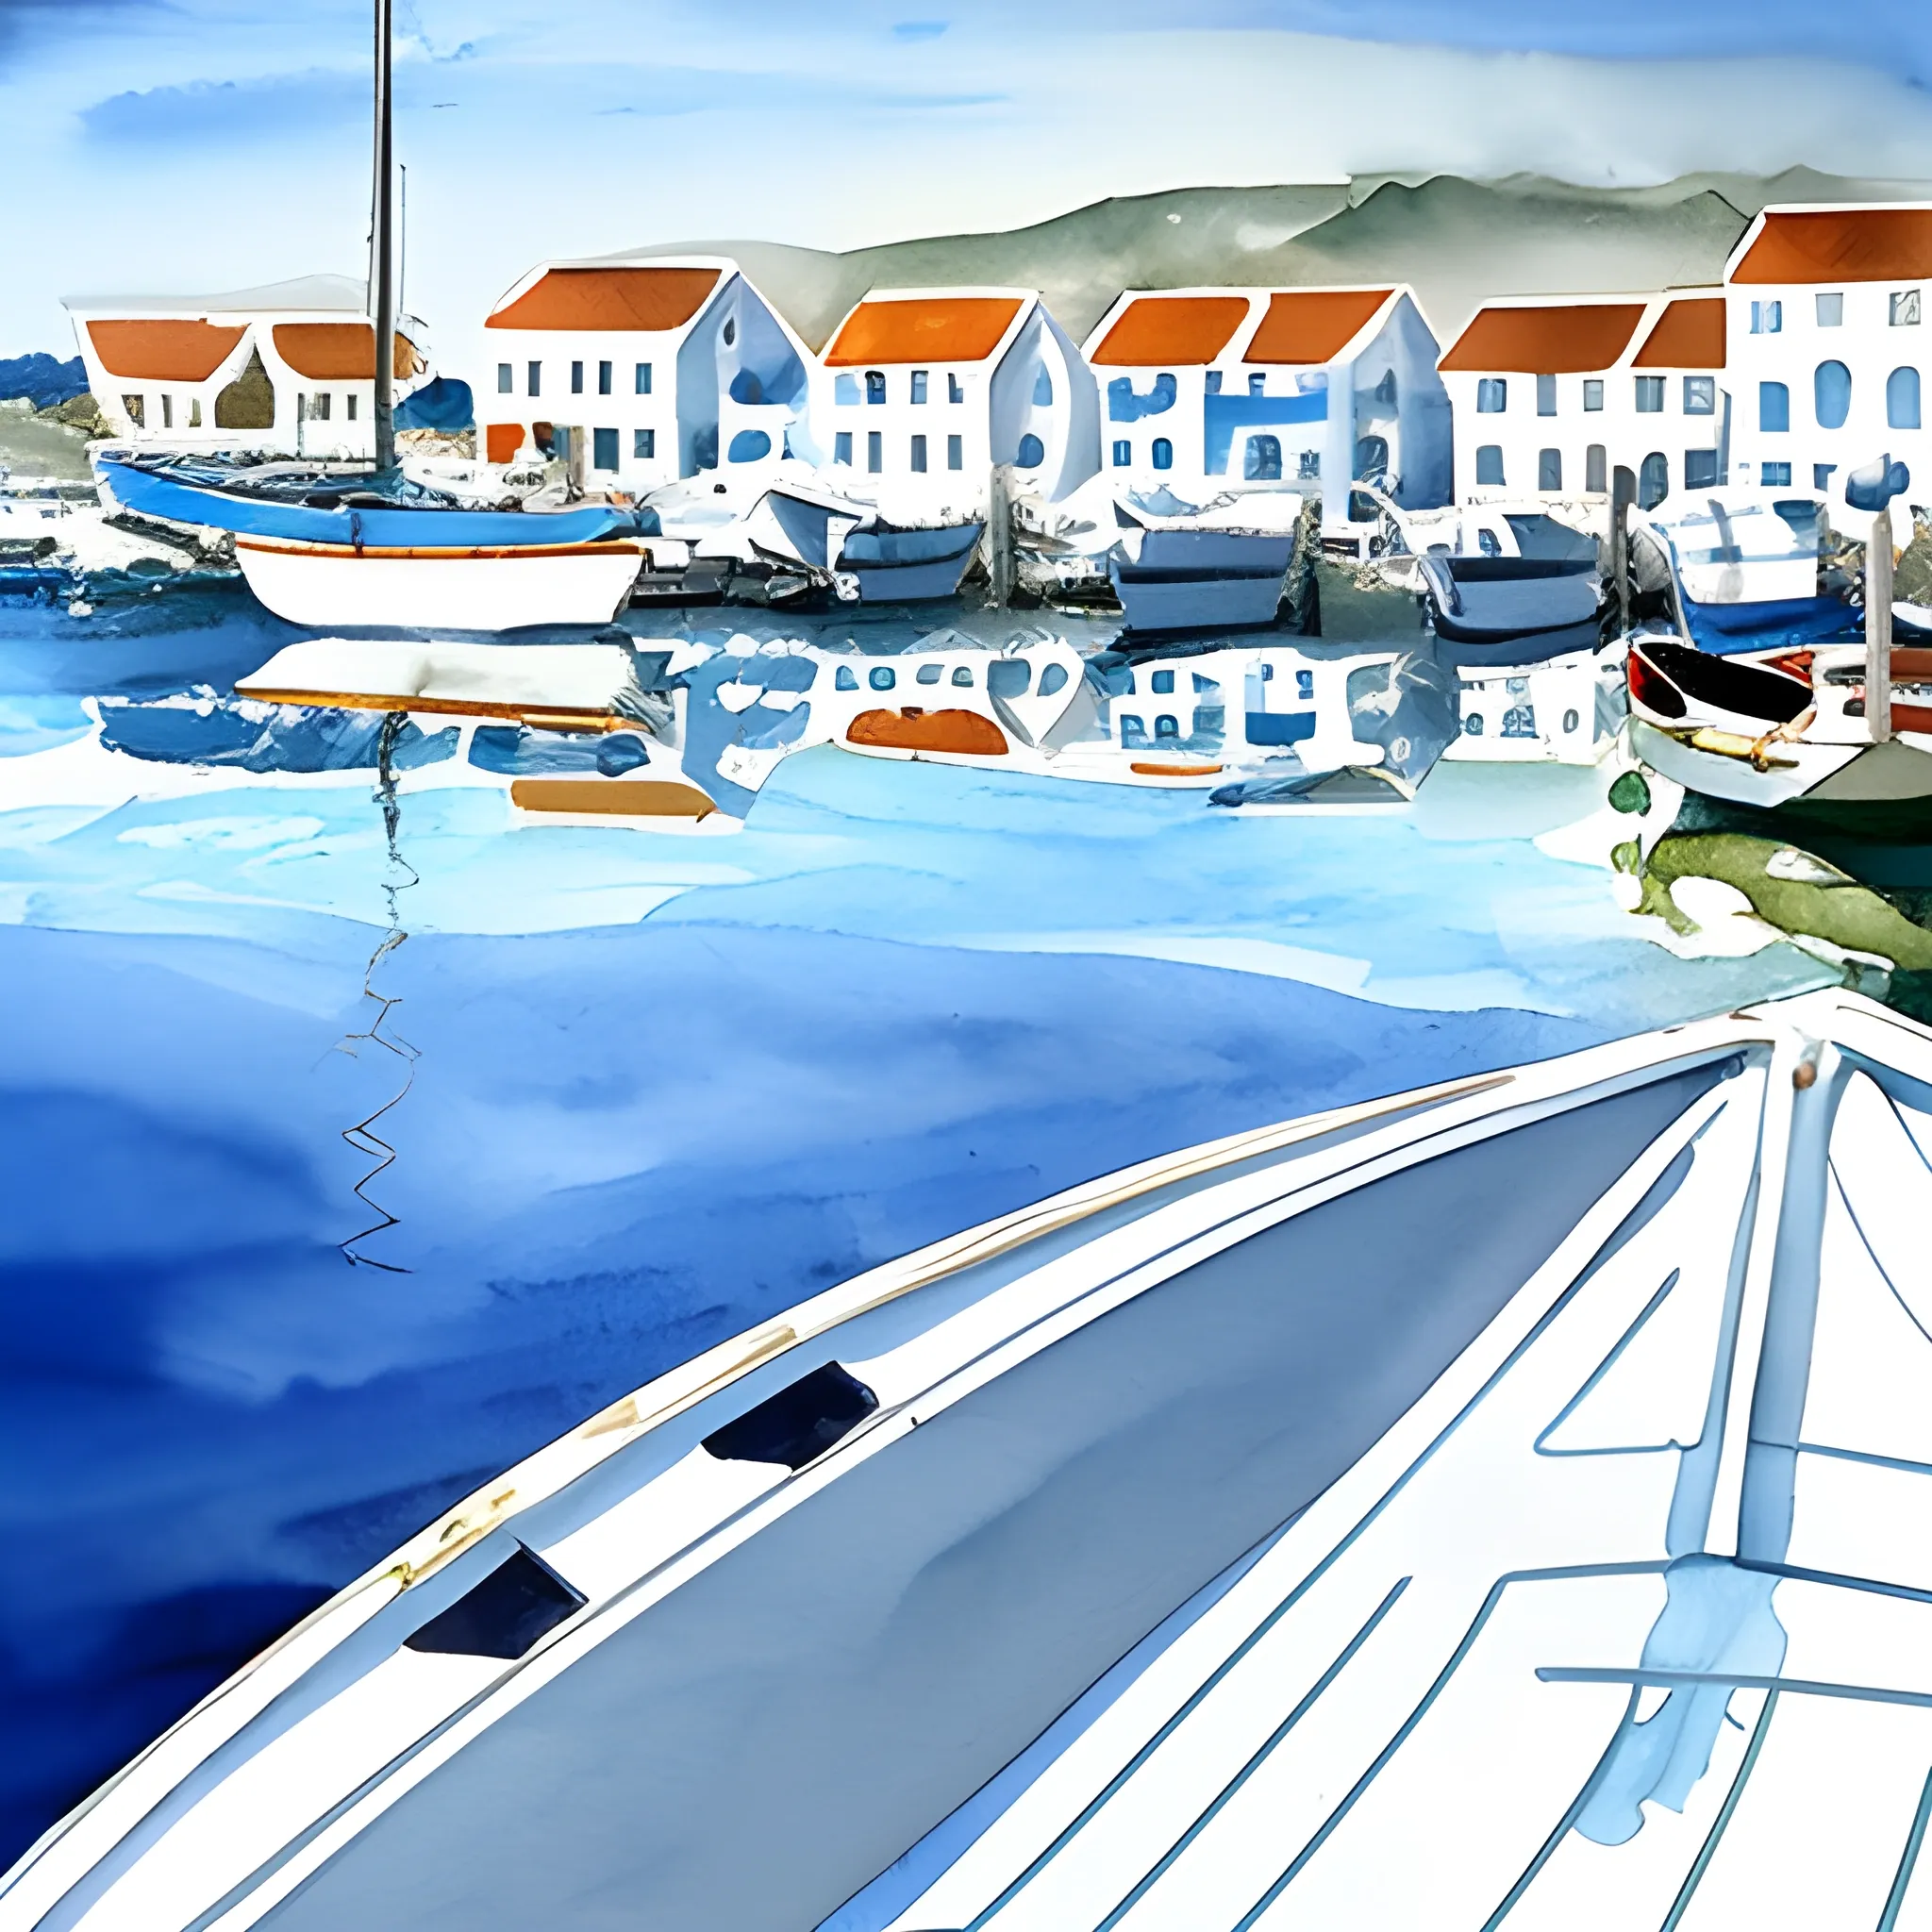 marina, one boat, reflections, horizon, shore, white houses, fisherman, in the distance, Water Color, anna masana
